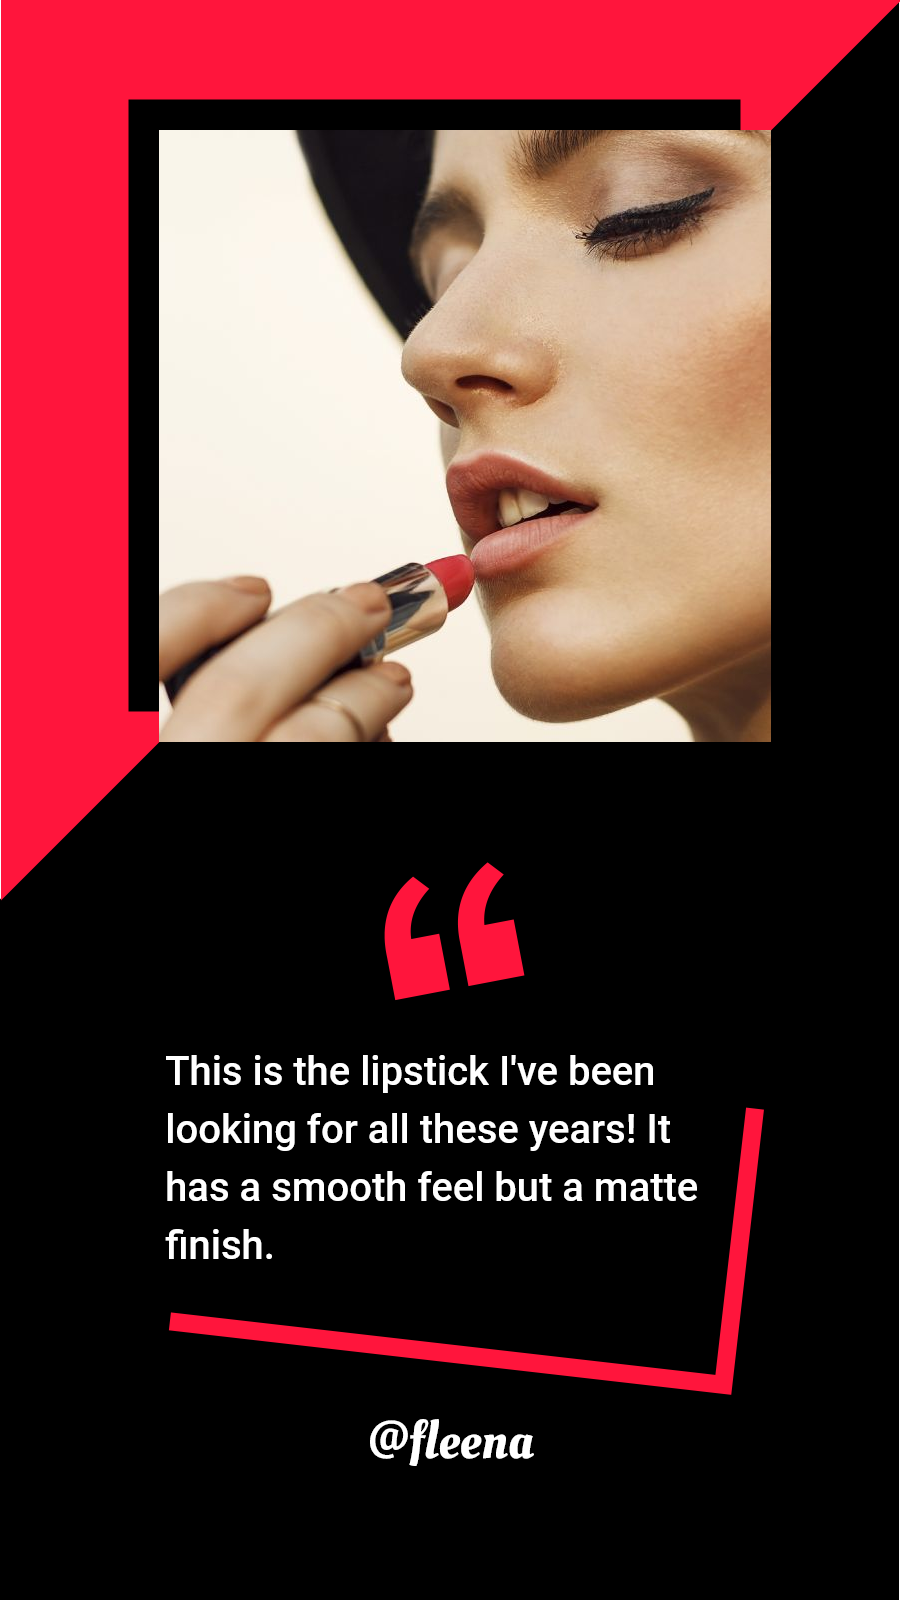 Lipstick Beauty Product Customer Feedback Review Ecommerce Story预览效果